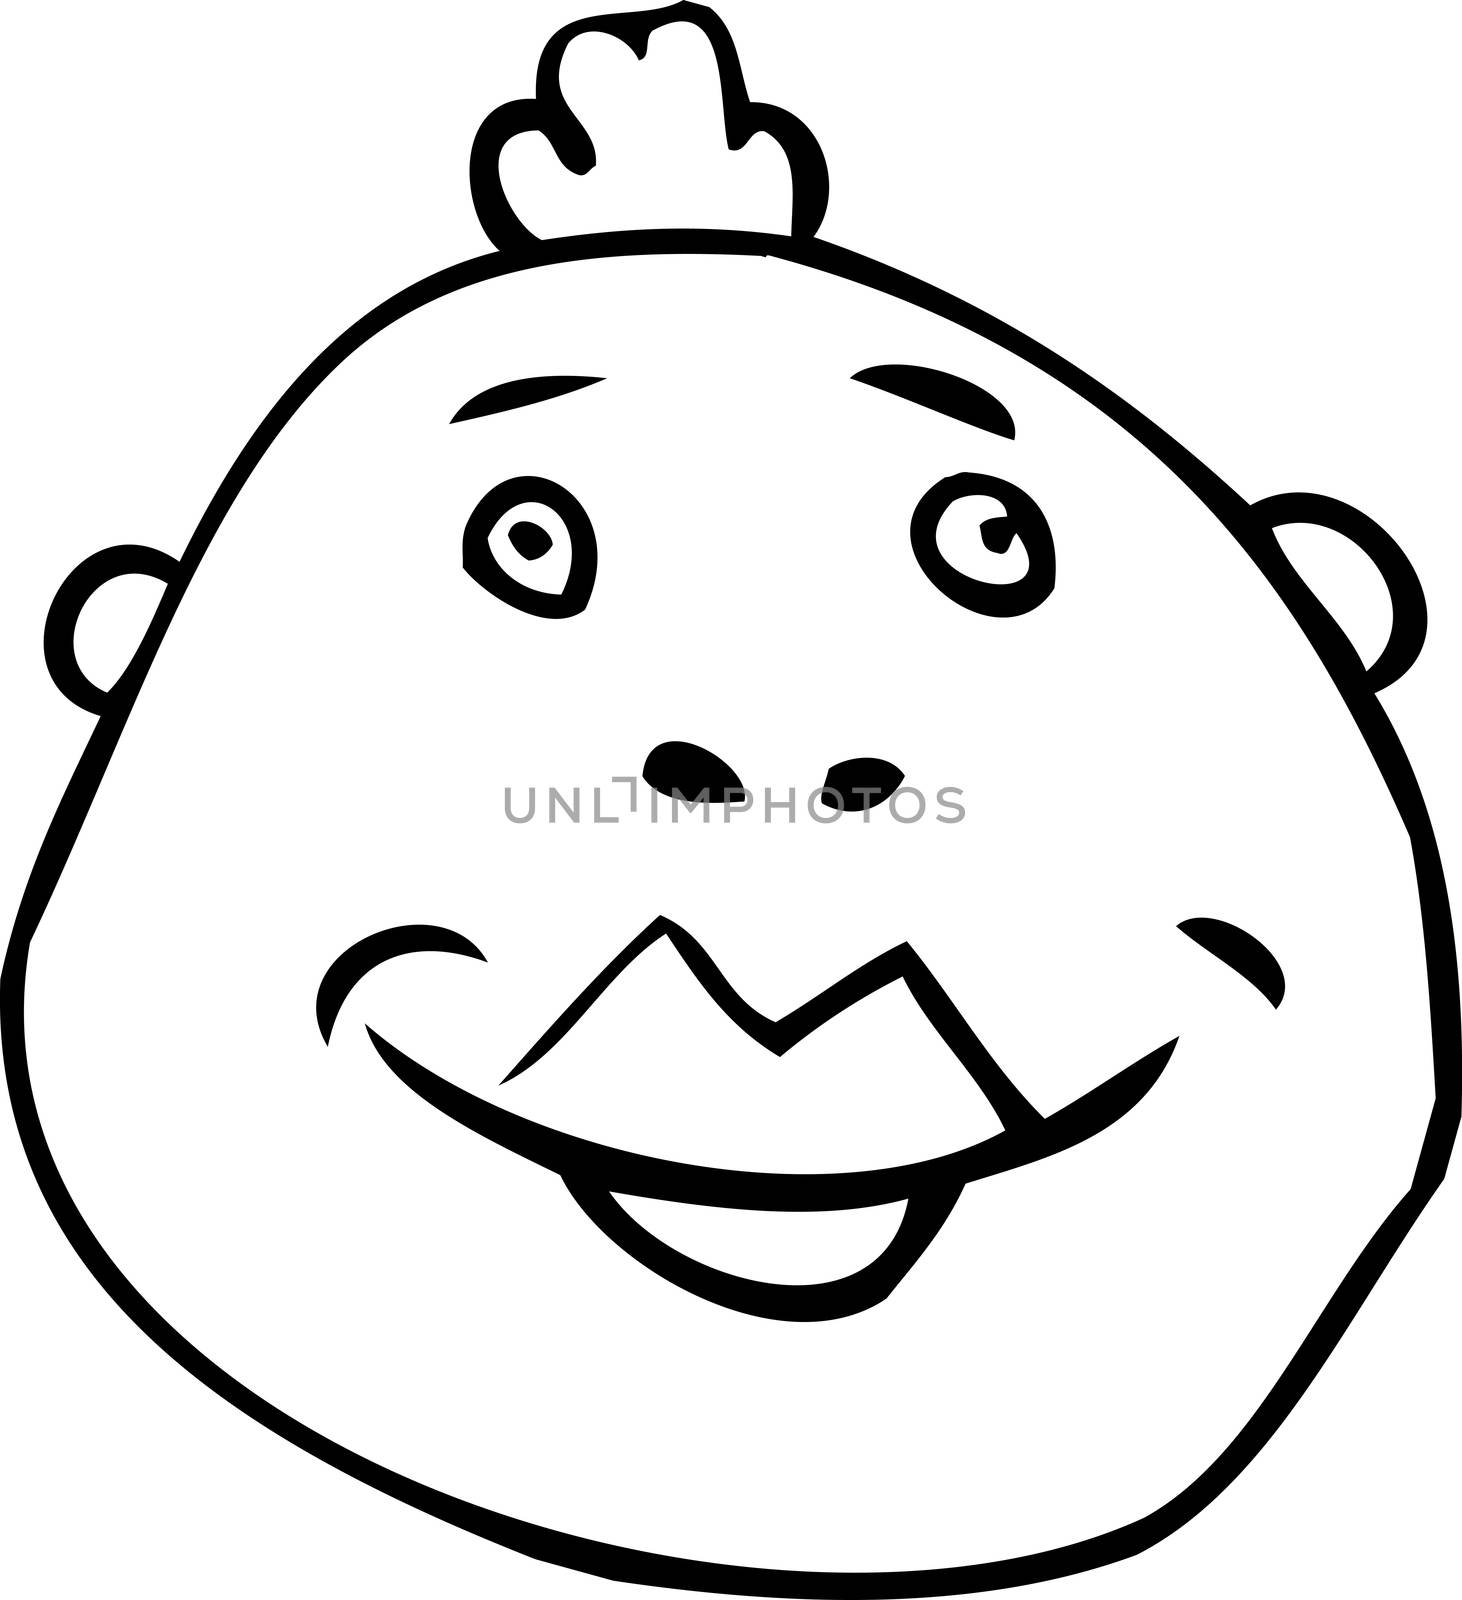 Outlined avatar of cheerful man with mohawk